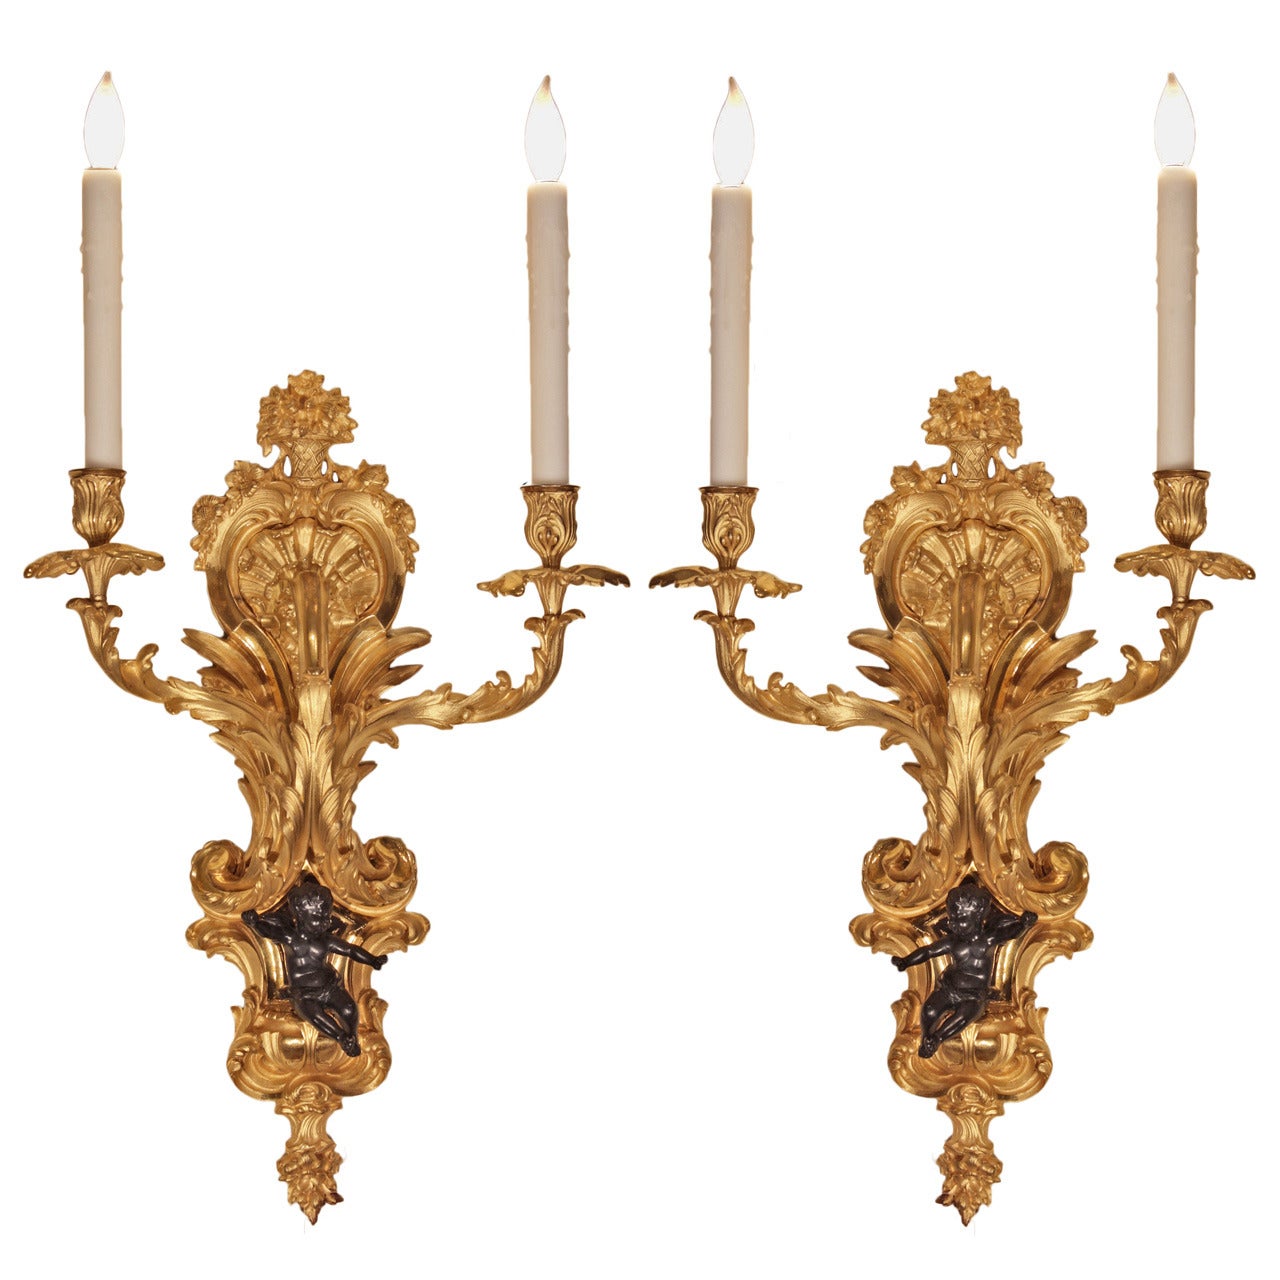 French Mid-19th Century, Louis XV Style Ormolu and  Bronze, Two Arm Sconces